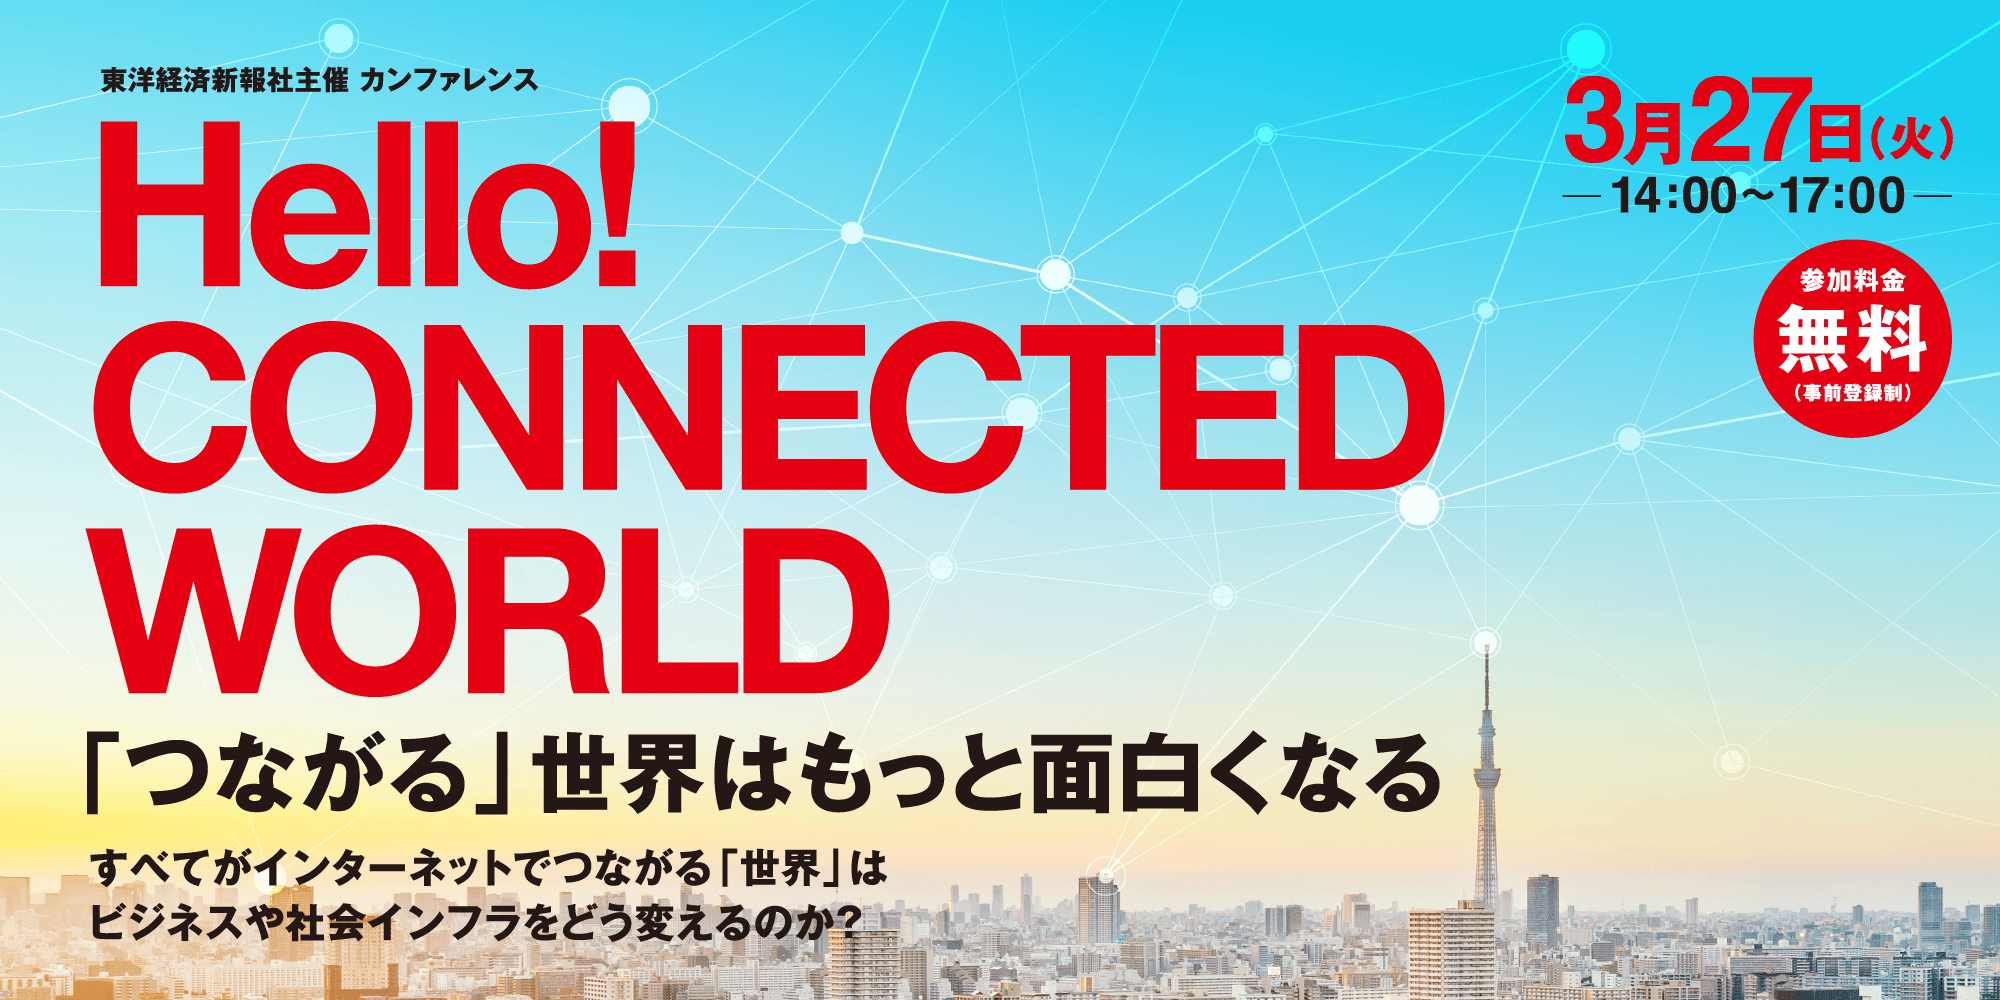 Hello! CONNECTED WORLD